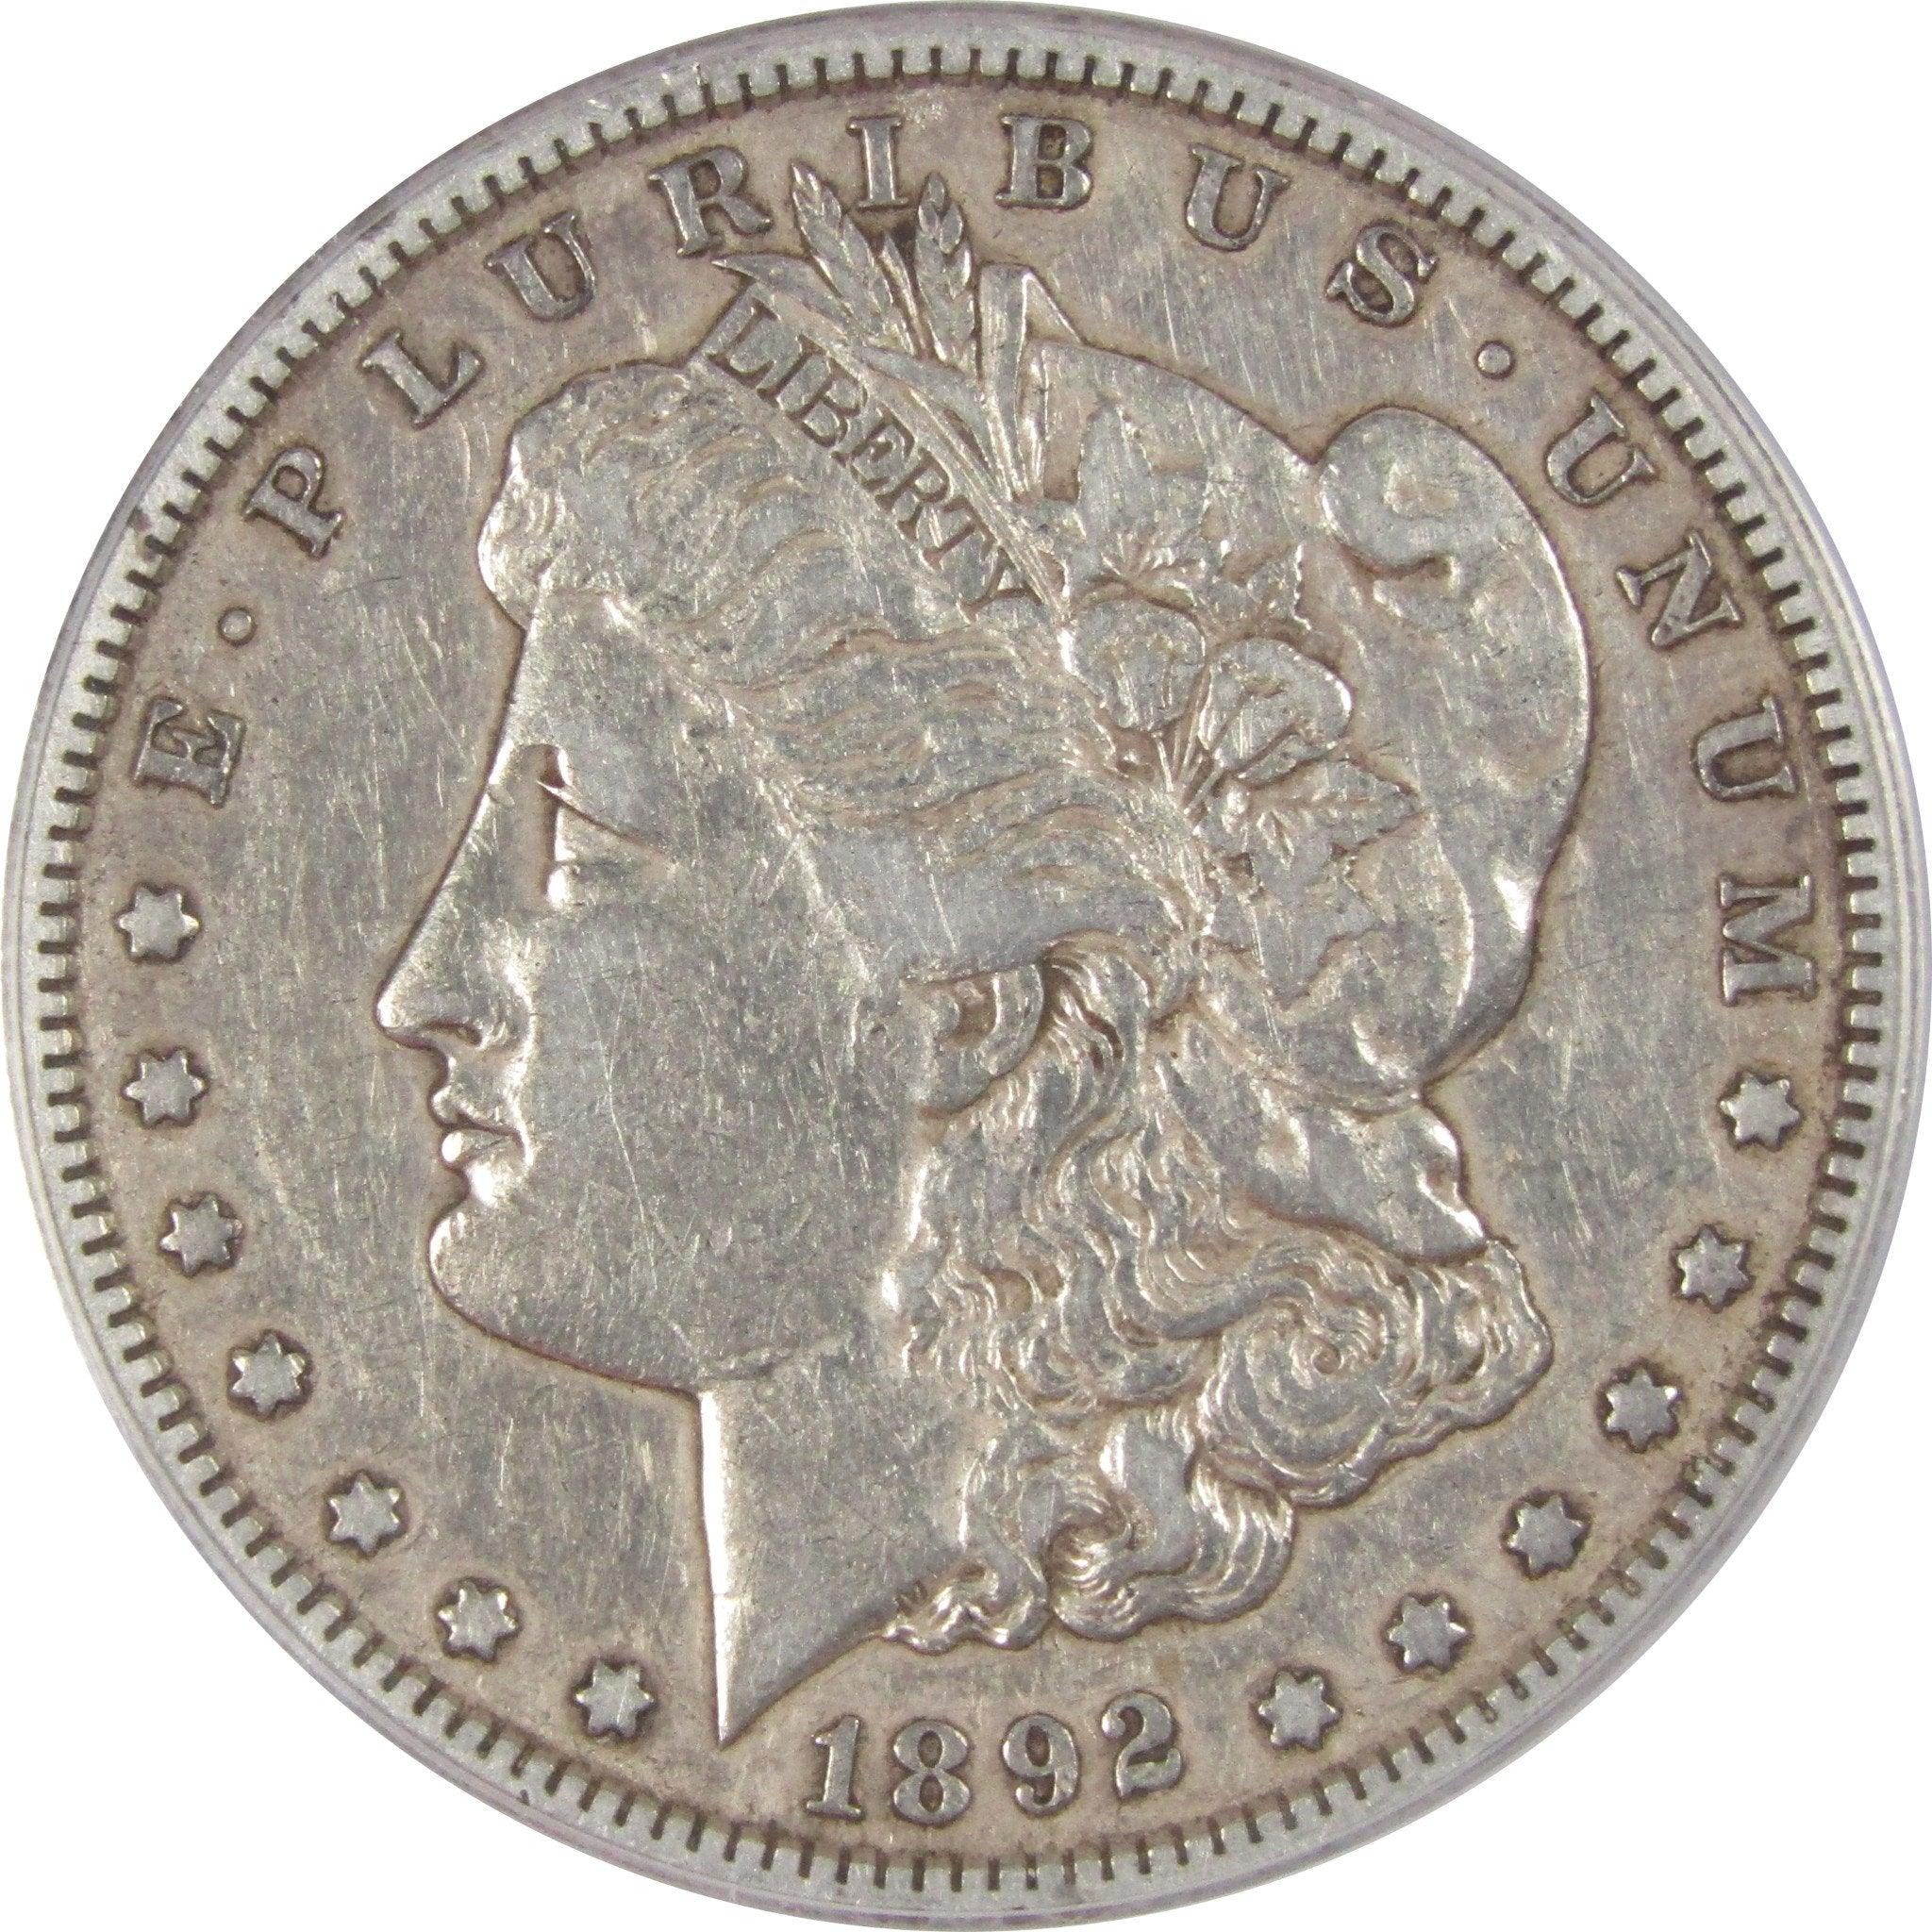 1892 S Morgan Dollar EF 40 Details ANACS 90% Silver SKU:CPC1118 - Morgan coin - Morgan silver dollar - Morgan silver dollar for sale - Profile Coins &amp; Collectibles